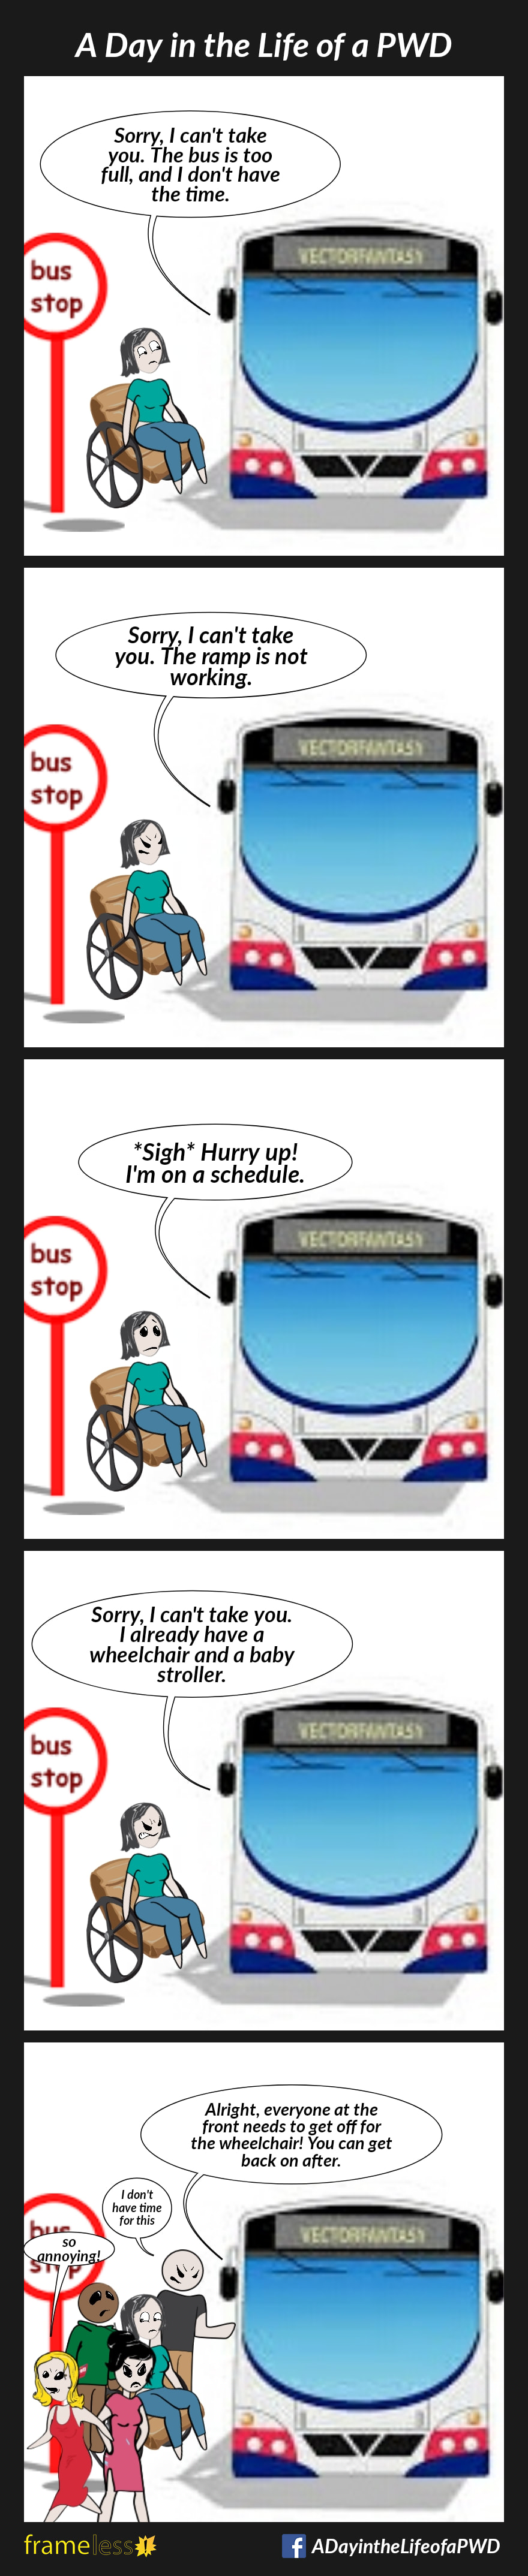 COMIC STRIP 
A Day in the Life of a PWD 

Frame 1:
A woman in a wheelchair is about to board a city bus.
DRIVER: Sorry, I can't take you. The bus is too full, and I don't have the time.

Frame 2:
Same scene, different day/bus.
DRIVER: Sorry, I can't take you. The ramp is not working. 

Frame 3:
Same scene, different day/bus.
DRIVER: *Sigh* Hurry up! I'm on a schedule. 

Frame 4:
Same scene, different day/bus.
DRIVER: Sorry, I can't take you. I already have a wheelchair and a baby stroller.

Frame 5:
Same scene, different day/bus.
DRIVER: All right, everyone at the front has to get off for the wheelchair! You can get back on after.
The passengers are irritated, and complaining, which embarrasses the woman.